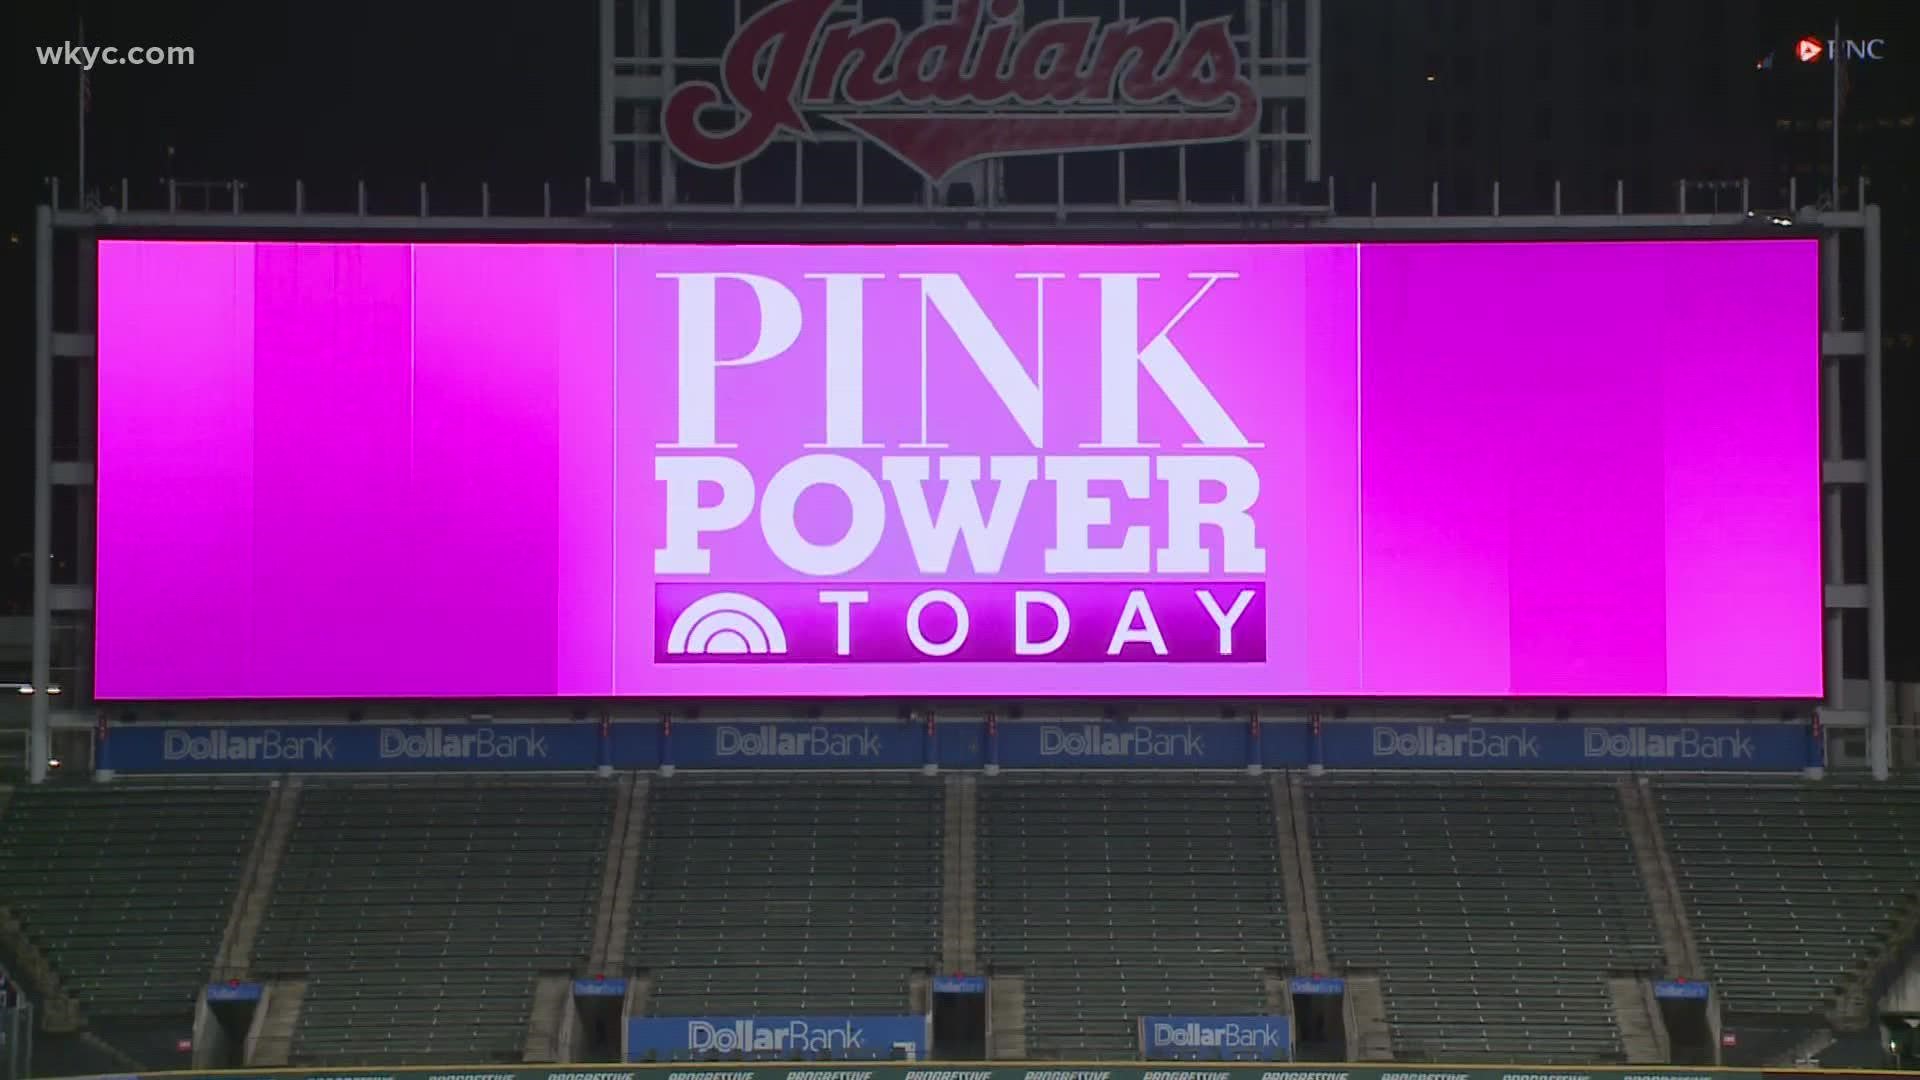 We're teaming up with NBC's 'TODAY' to paint the town pink in honor of Breast Cancer Awareness Month.